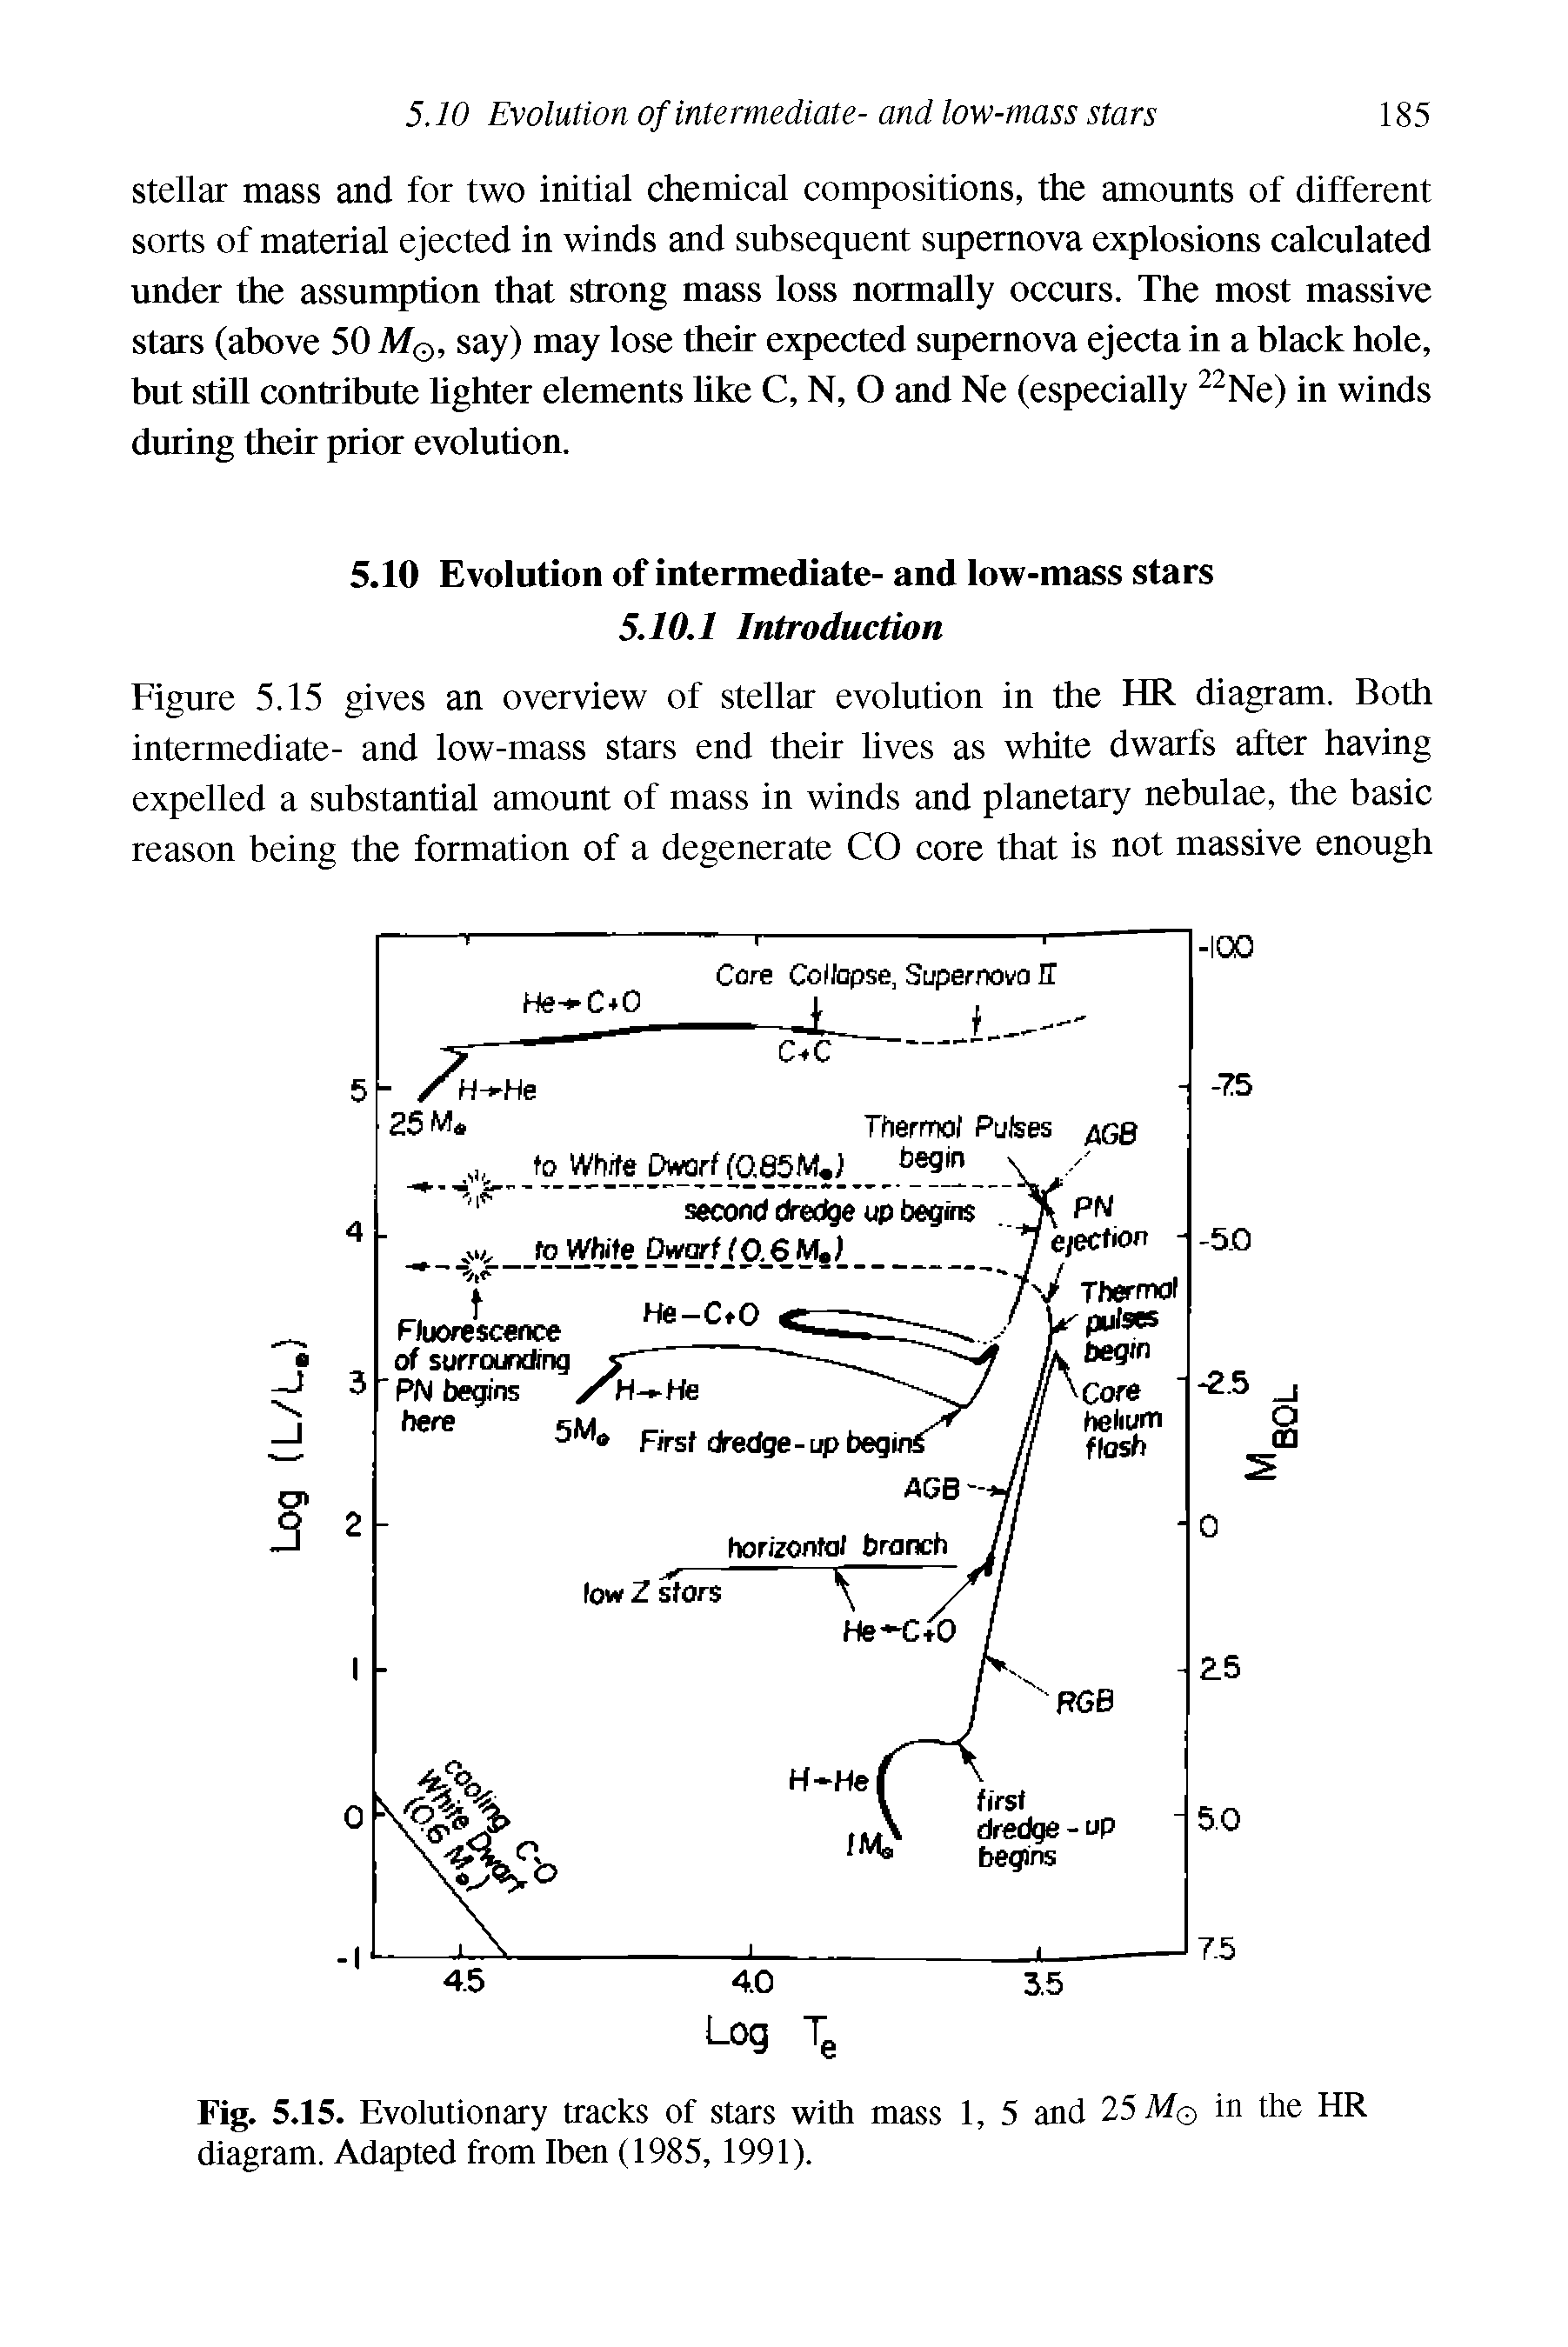 Fig. 5.15. Evolutionary tracks of stars with mass 1, 5 and 25 Mq in the HR diagram. Adapted from Iben (1985, 1991).